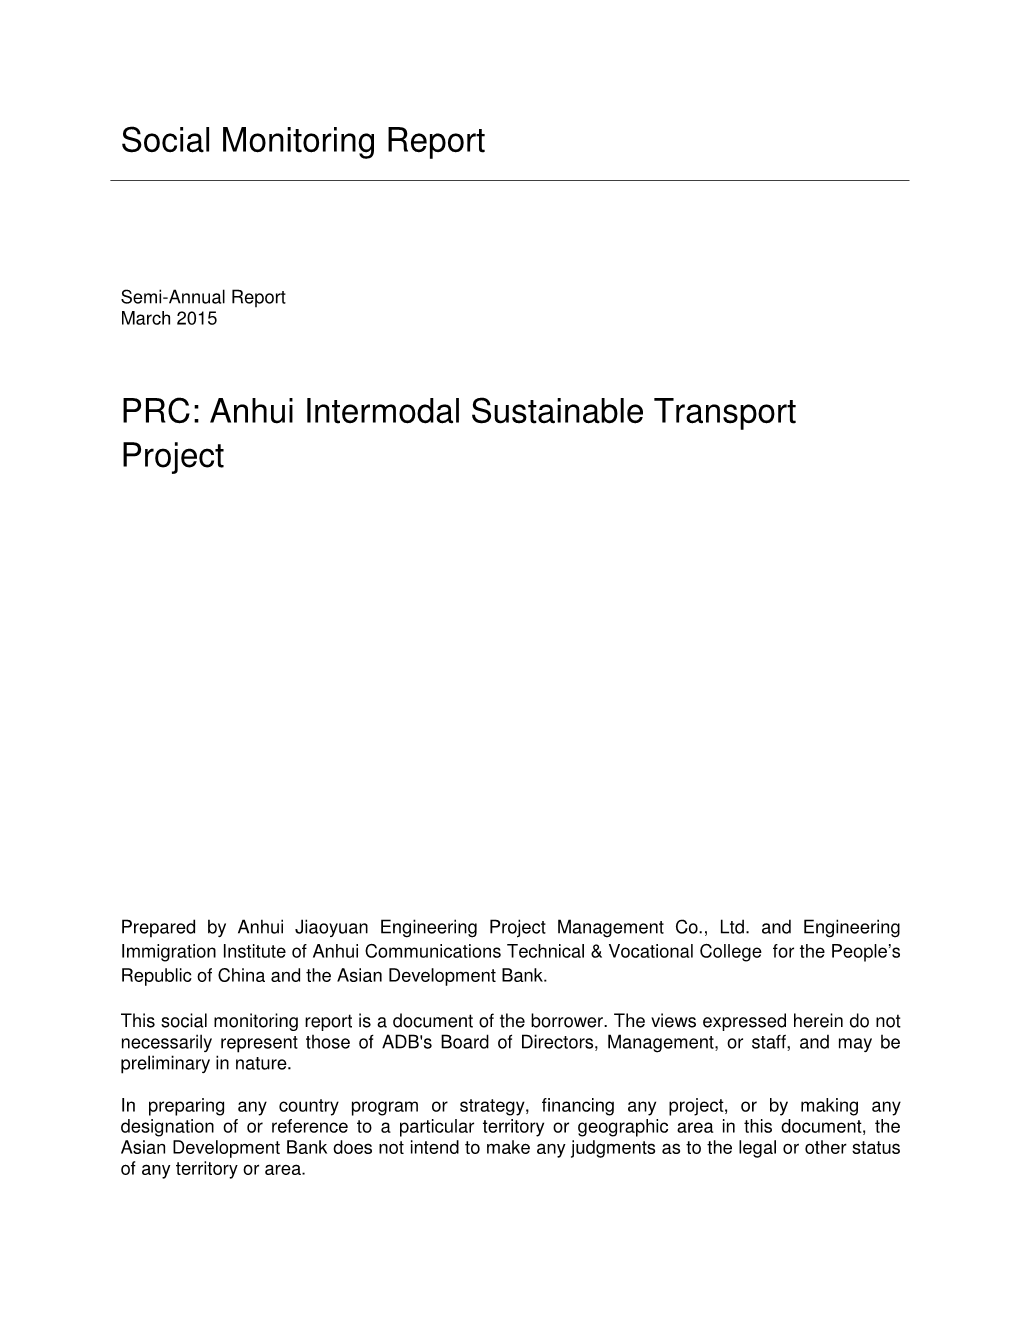 Anhui Intermodal Sustainable Transport Project